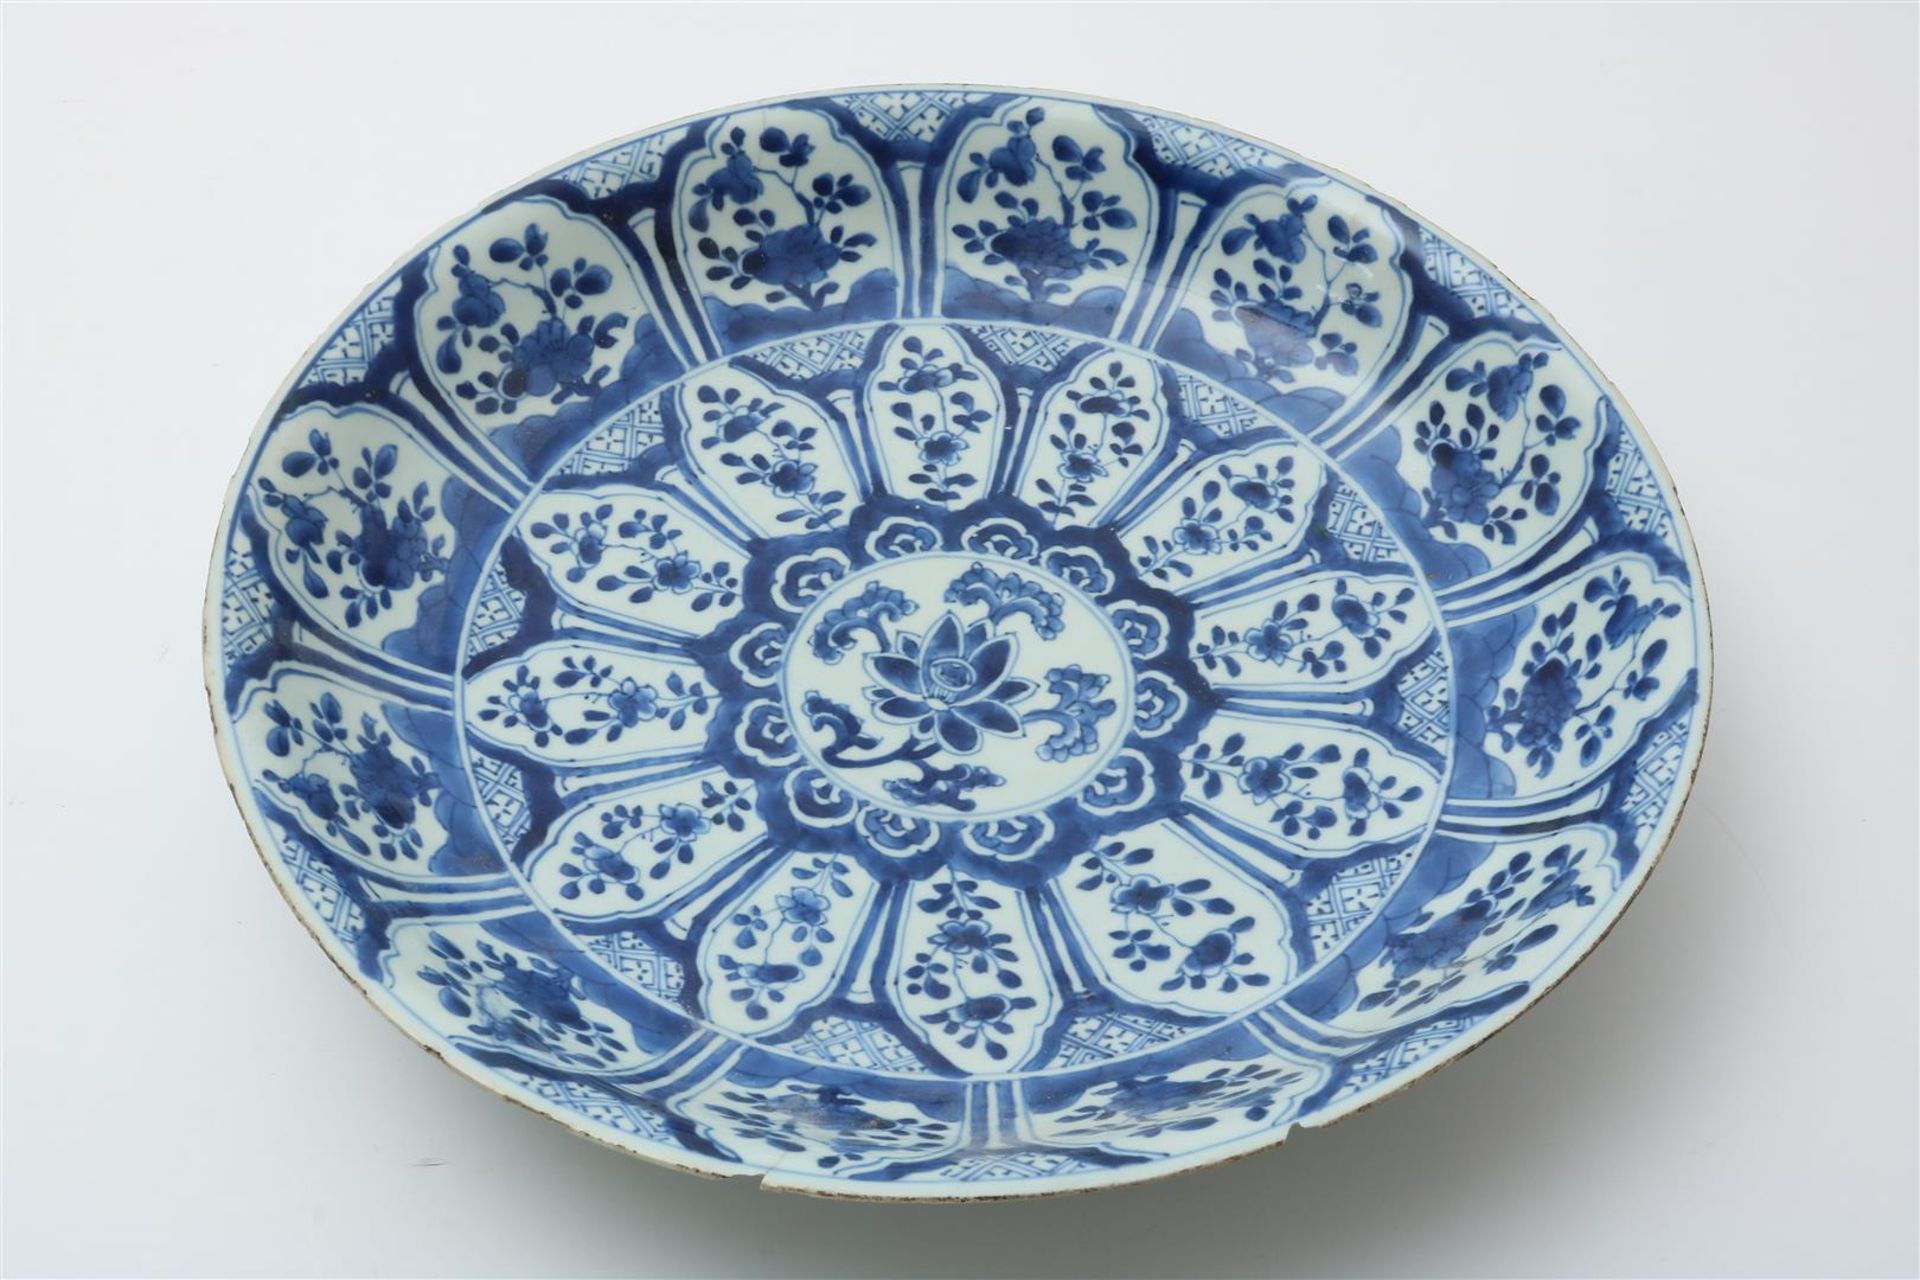 Porcelain Kangxi Lotus dish centered decorated with flowers surrounded by flower edges, China 18th